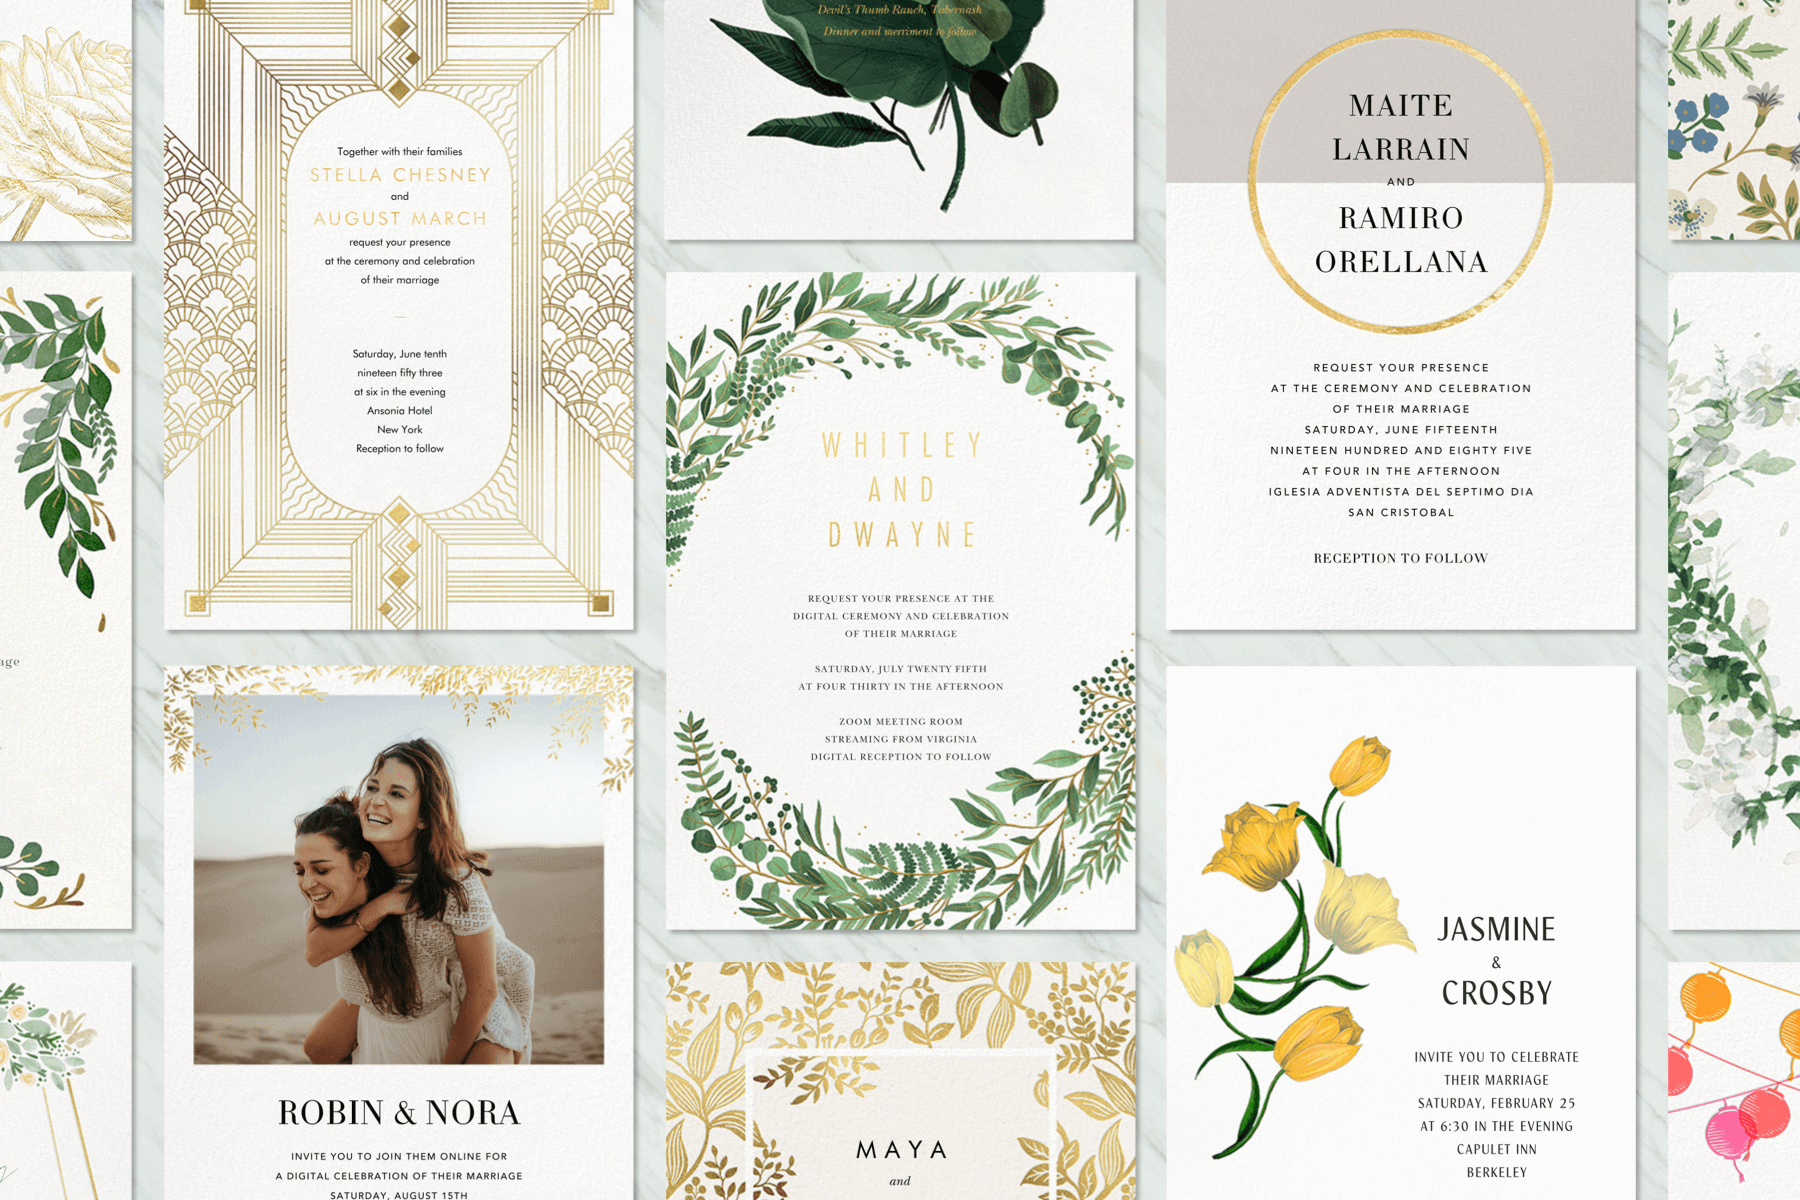 how to address wedding invitations: guide and examples | paperless